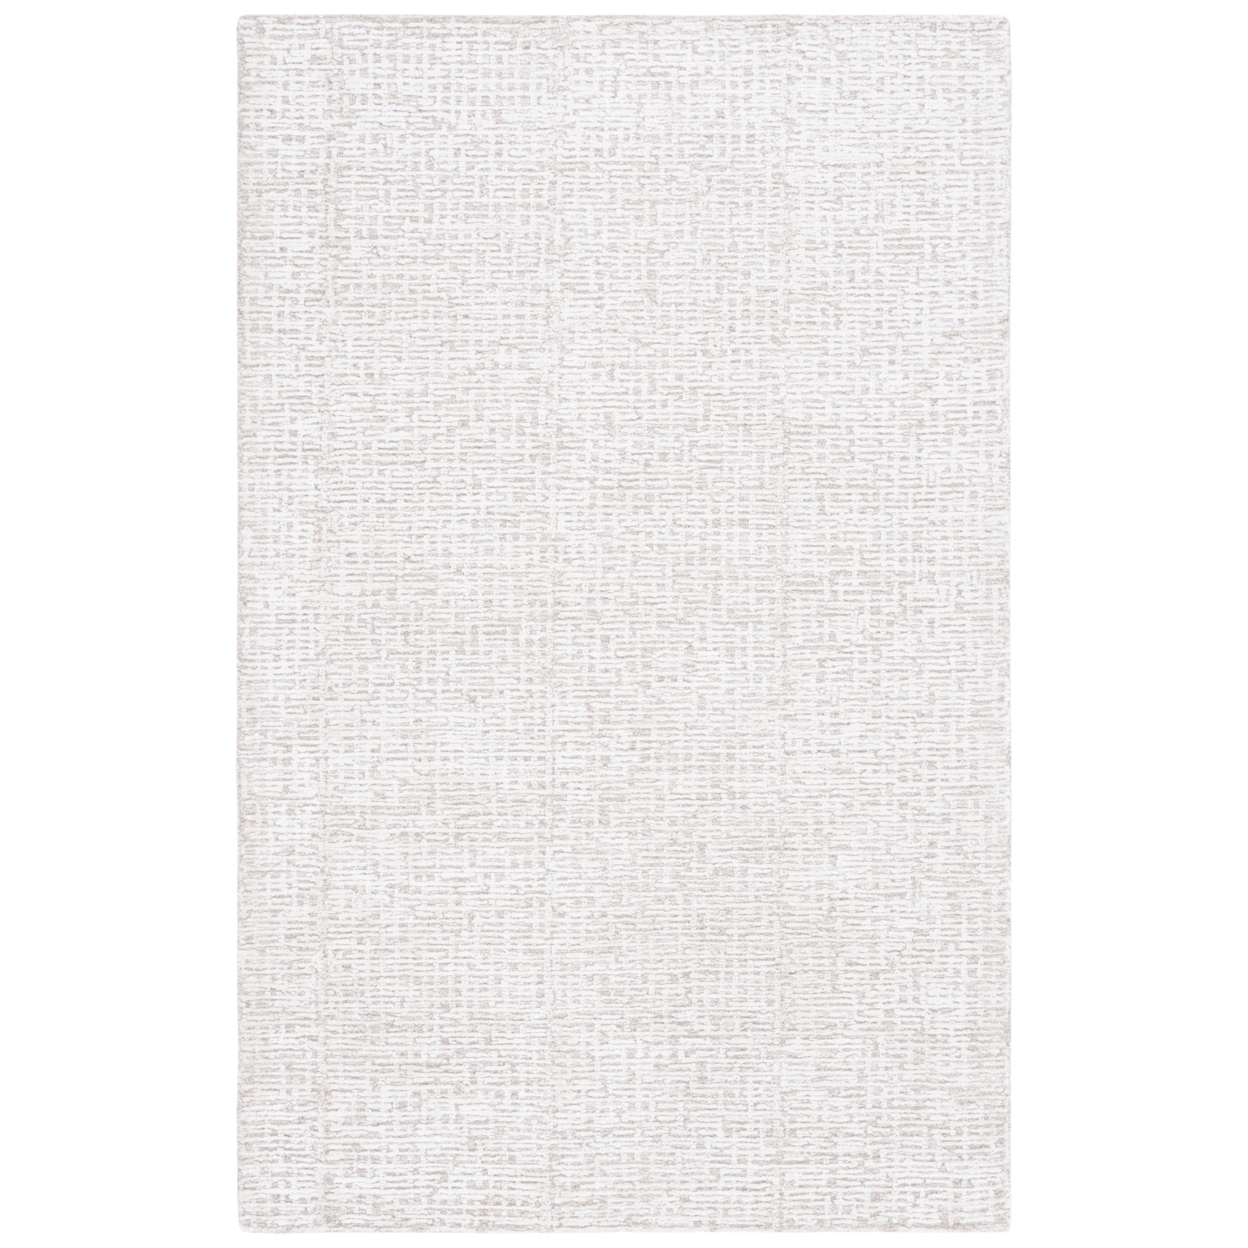 Safavieh GLM601A Glamour Natural / Ivory - Ivory / Black, 5' X 8' Rectangle